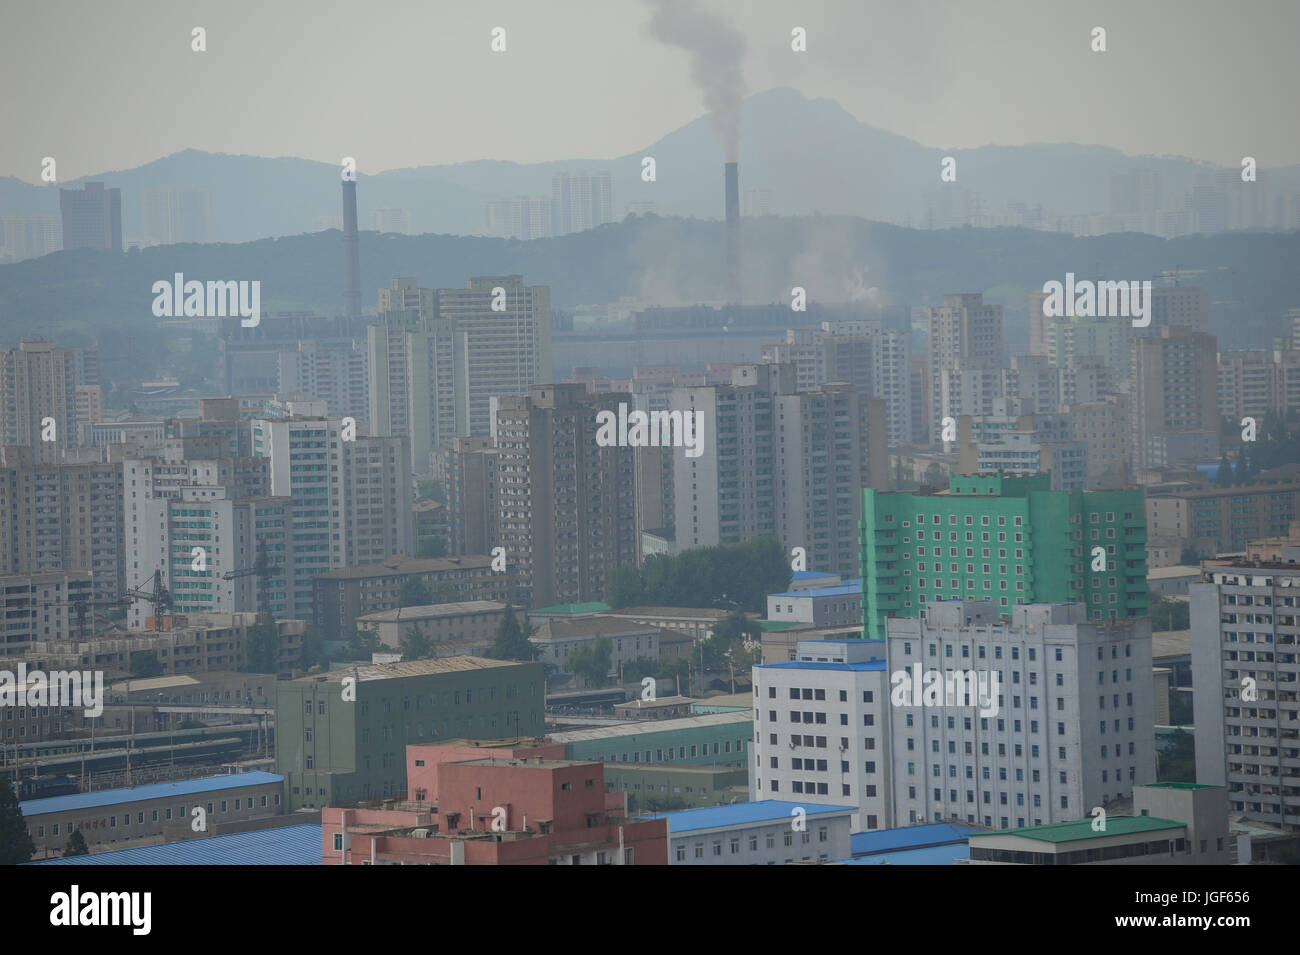 09.08.2012, Pyongyang, North Korea, Asia - An elevated view of central Pyongyang with multi-storey residential buildings and a power station. Stock Photo